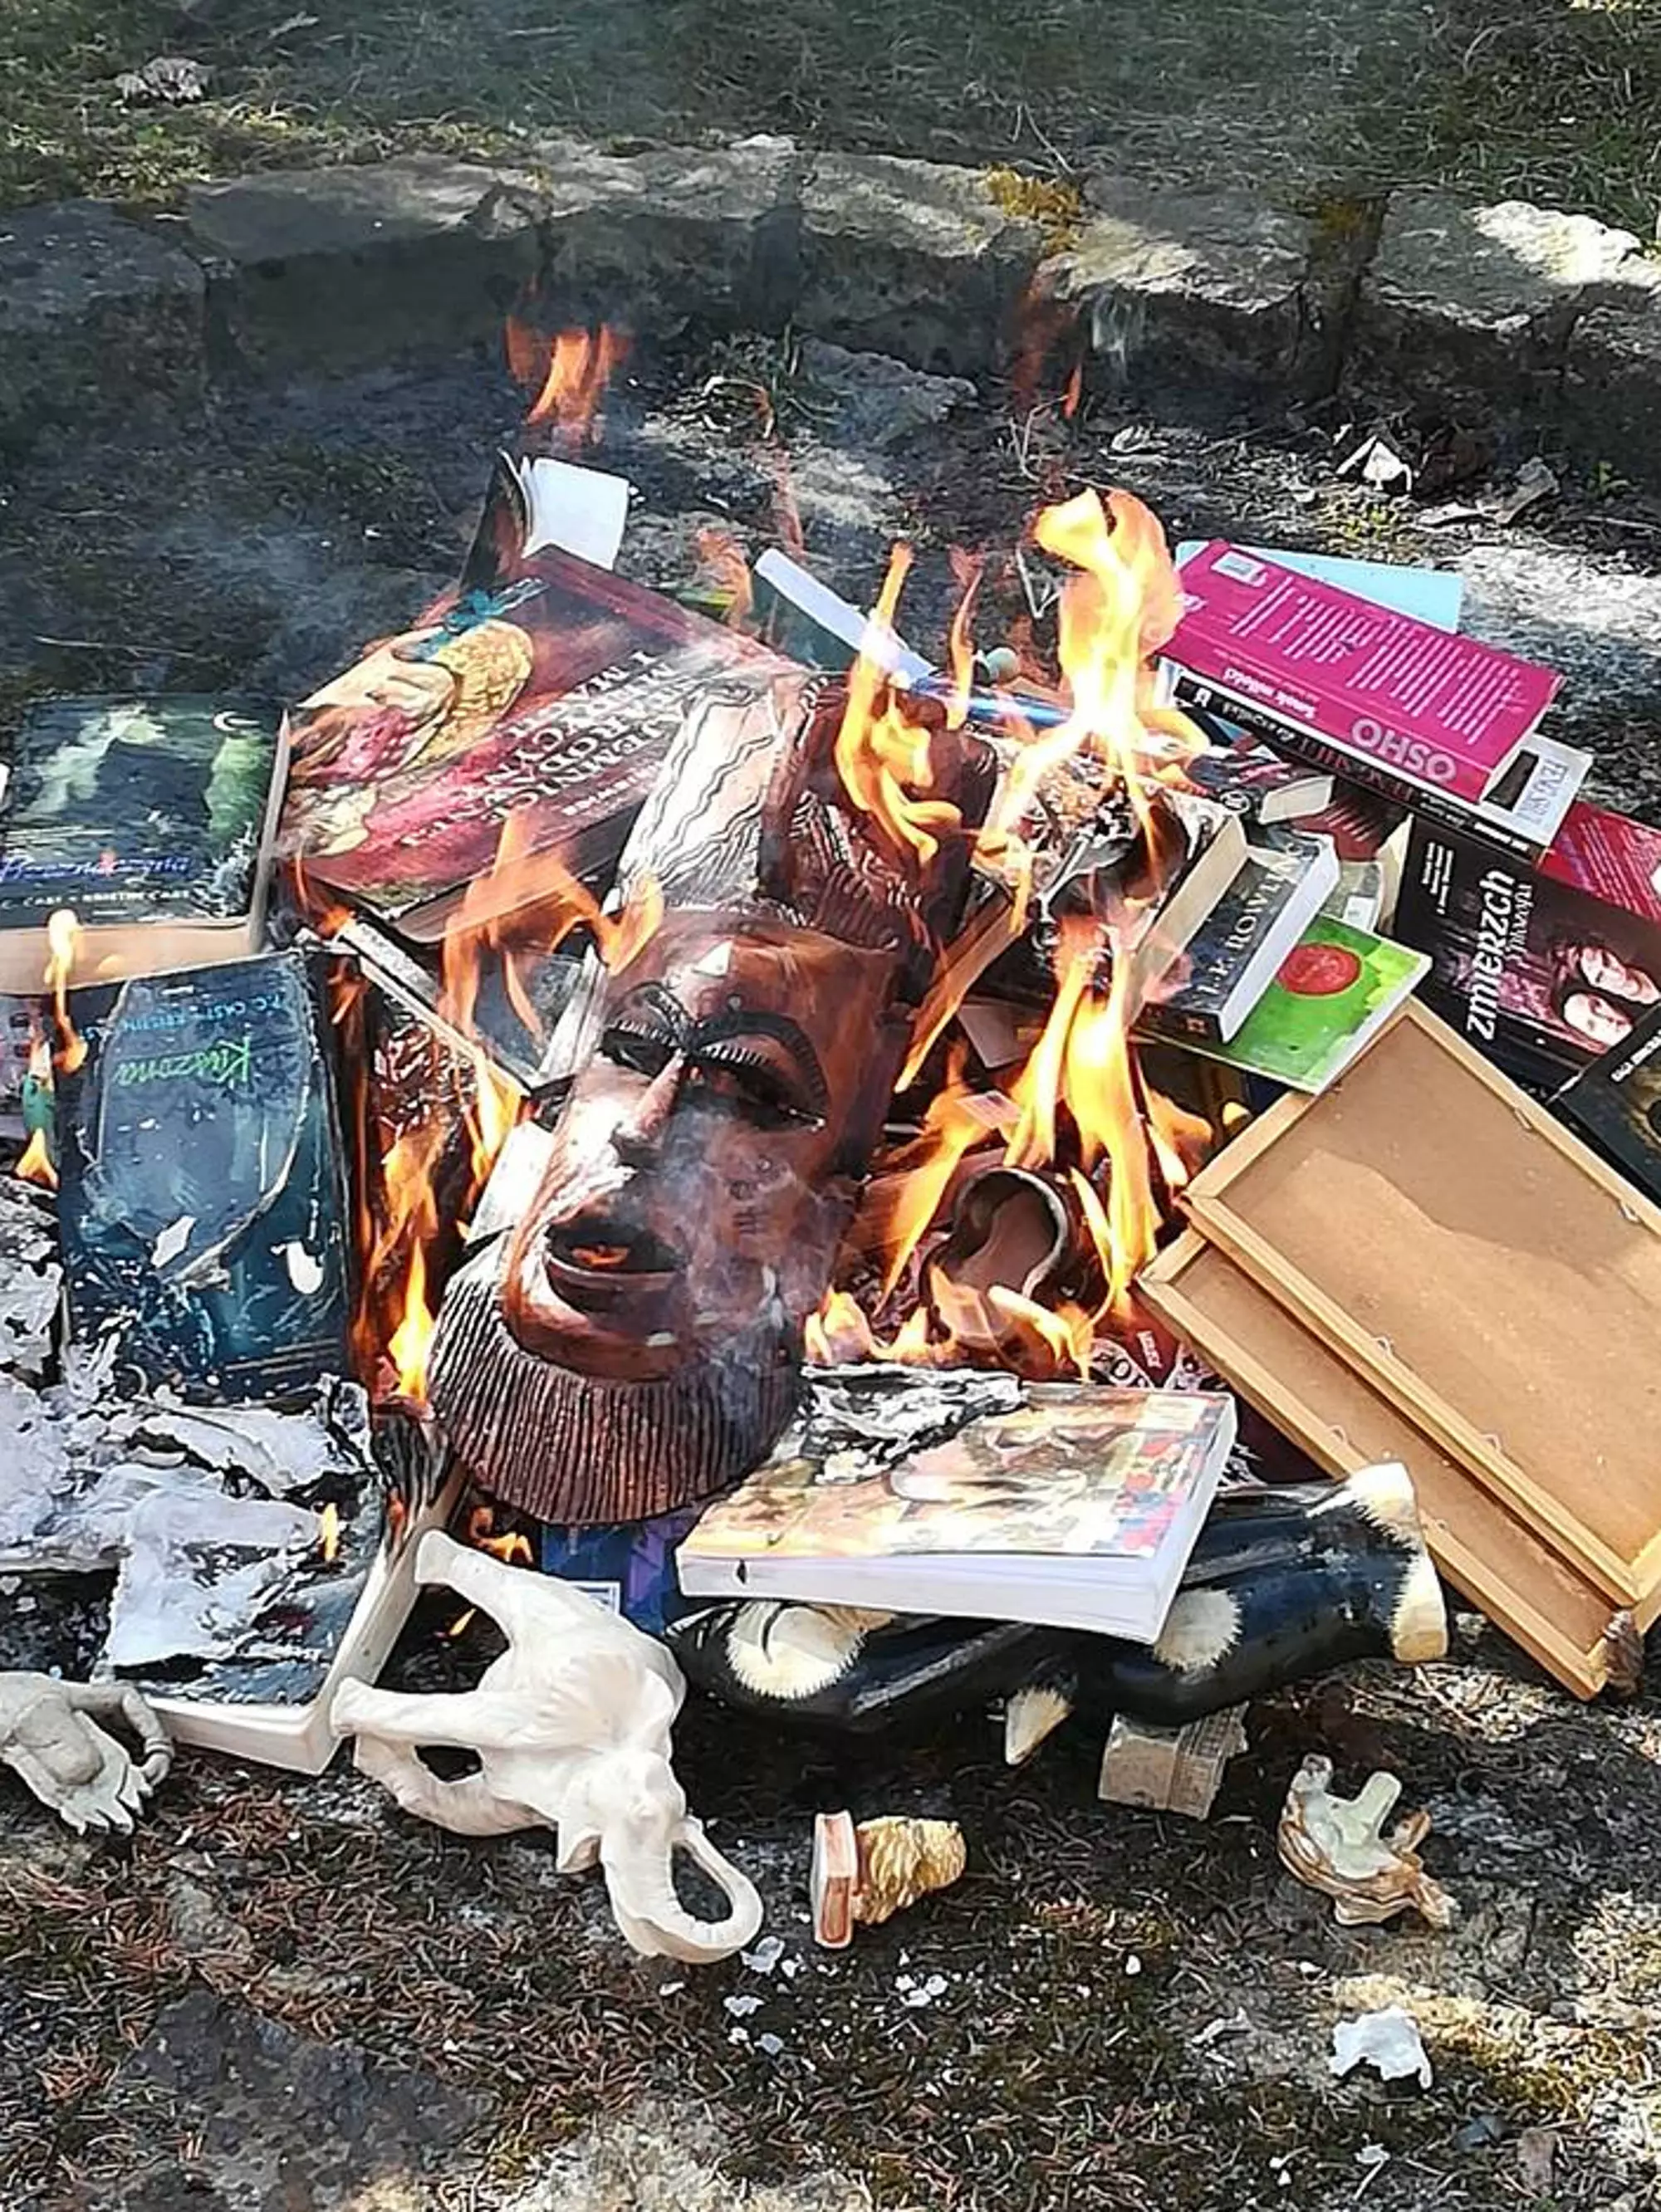 A self-development book by Indian guru Osho and a Hello Kitty umbrella were also seen in the fire.